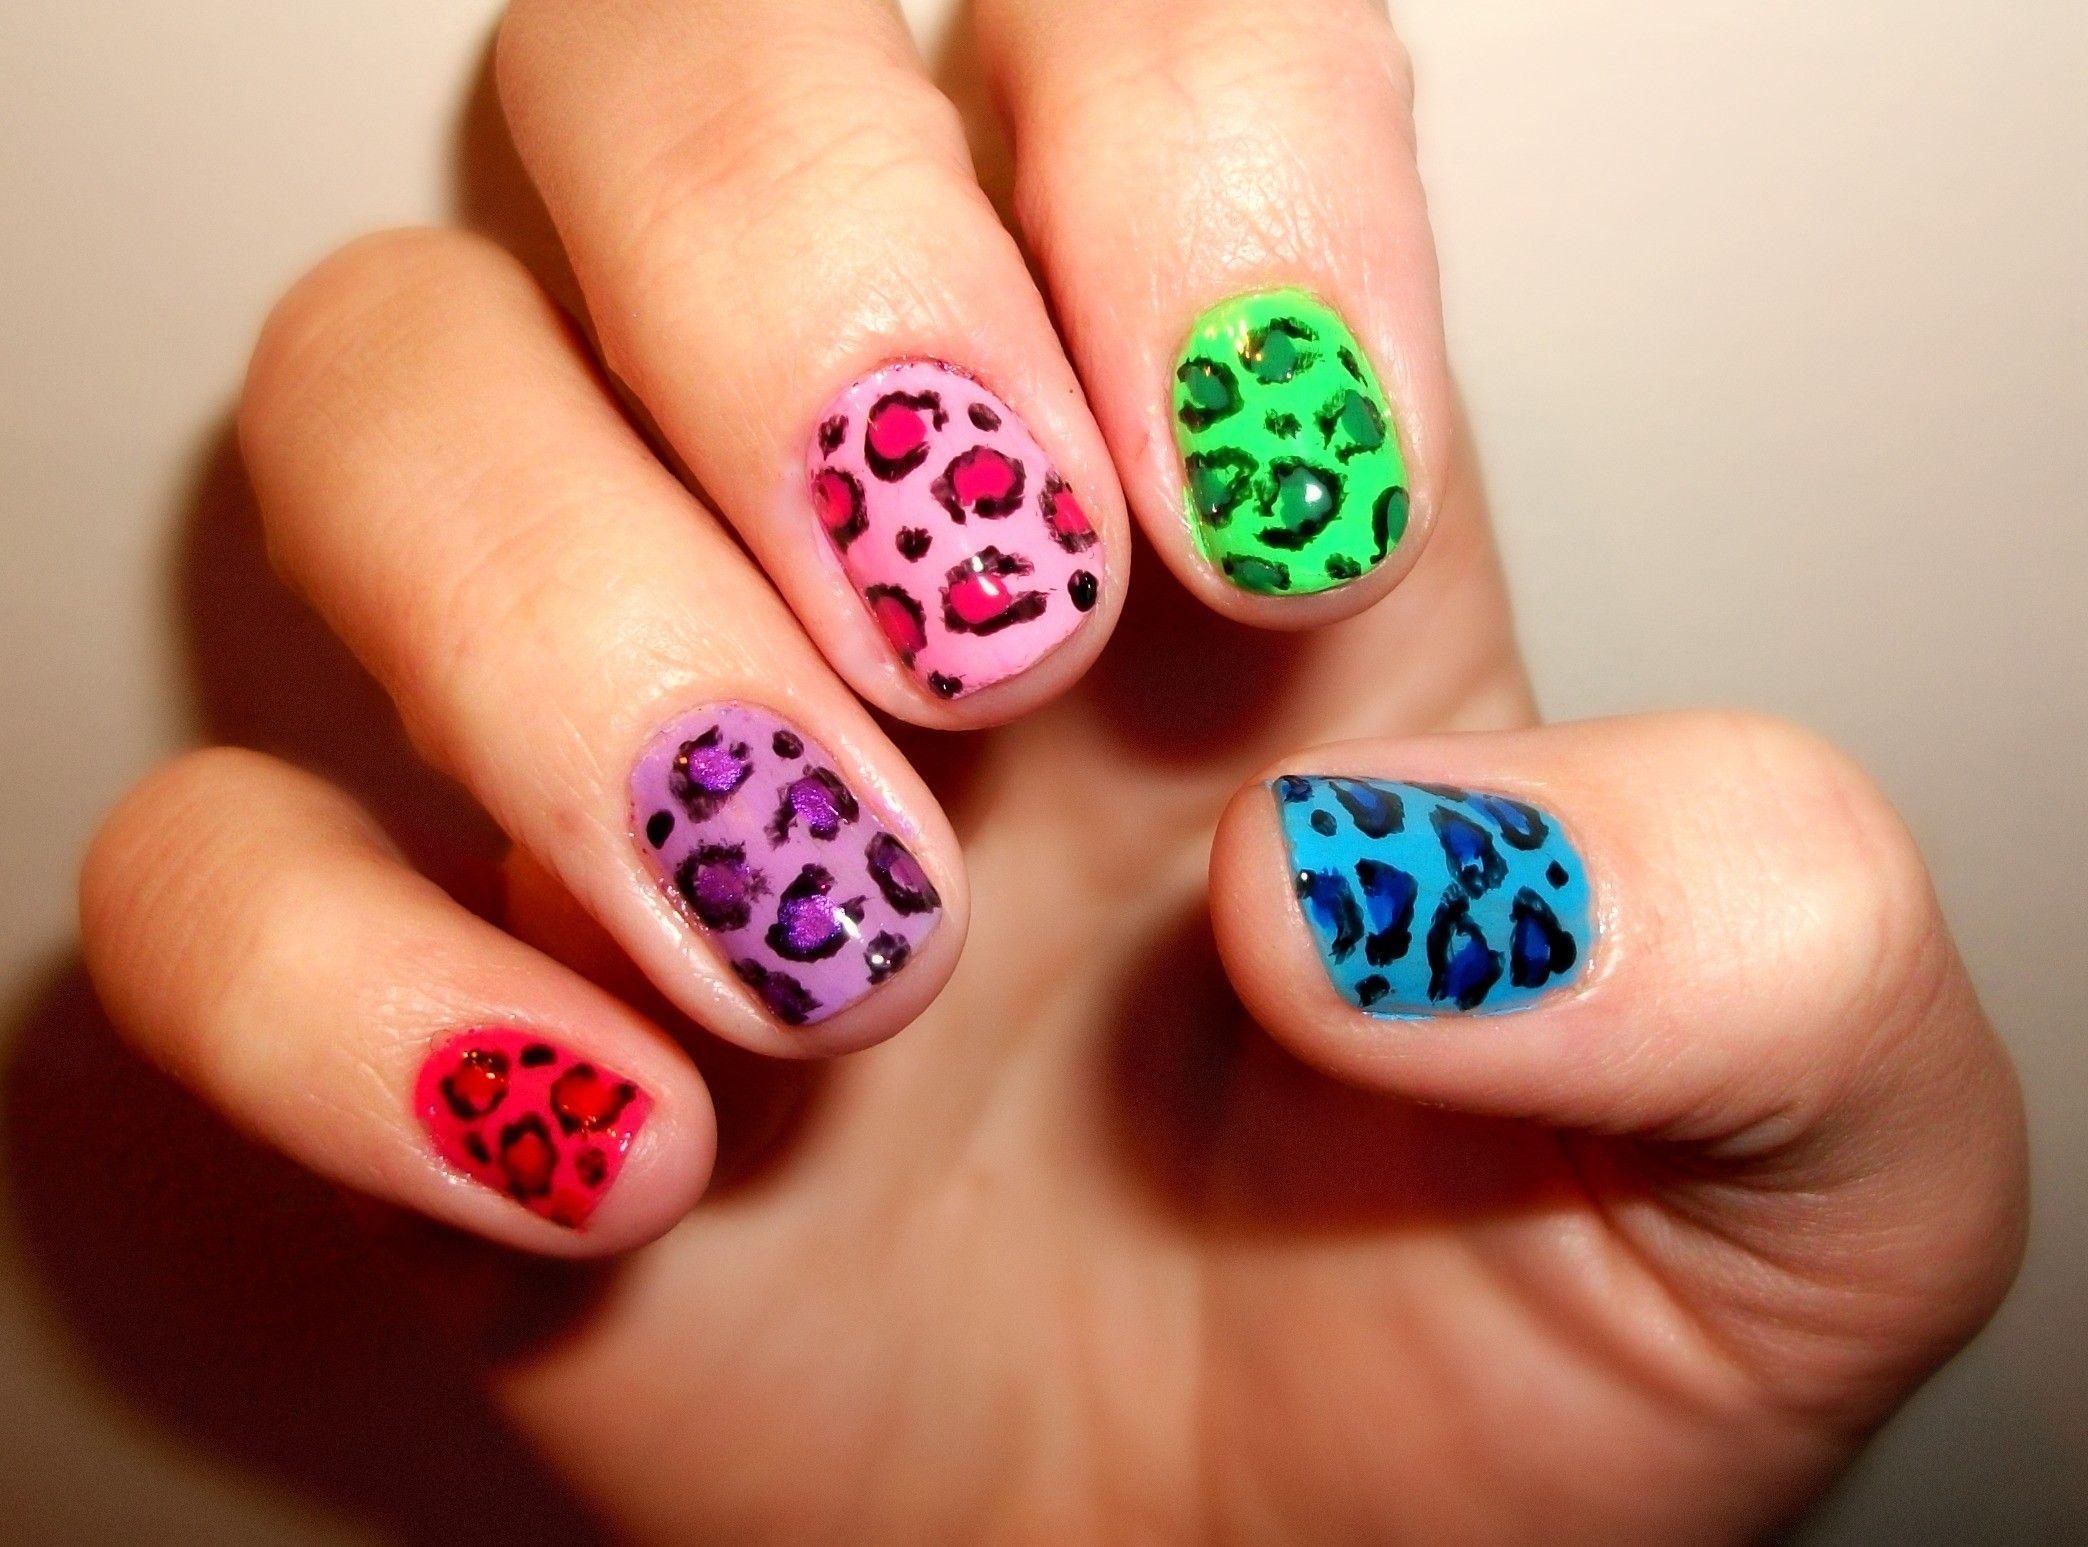 5. Free Nail Design Pictures on We Heart It - wide 2